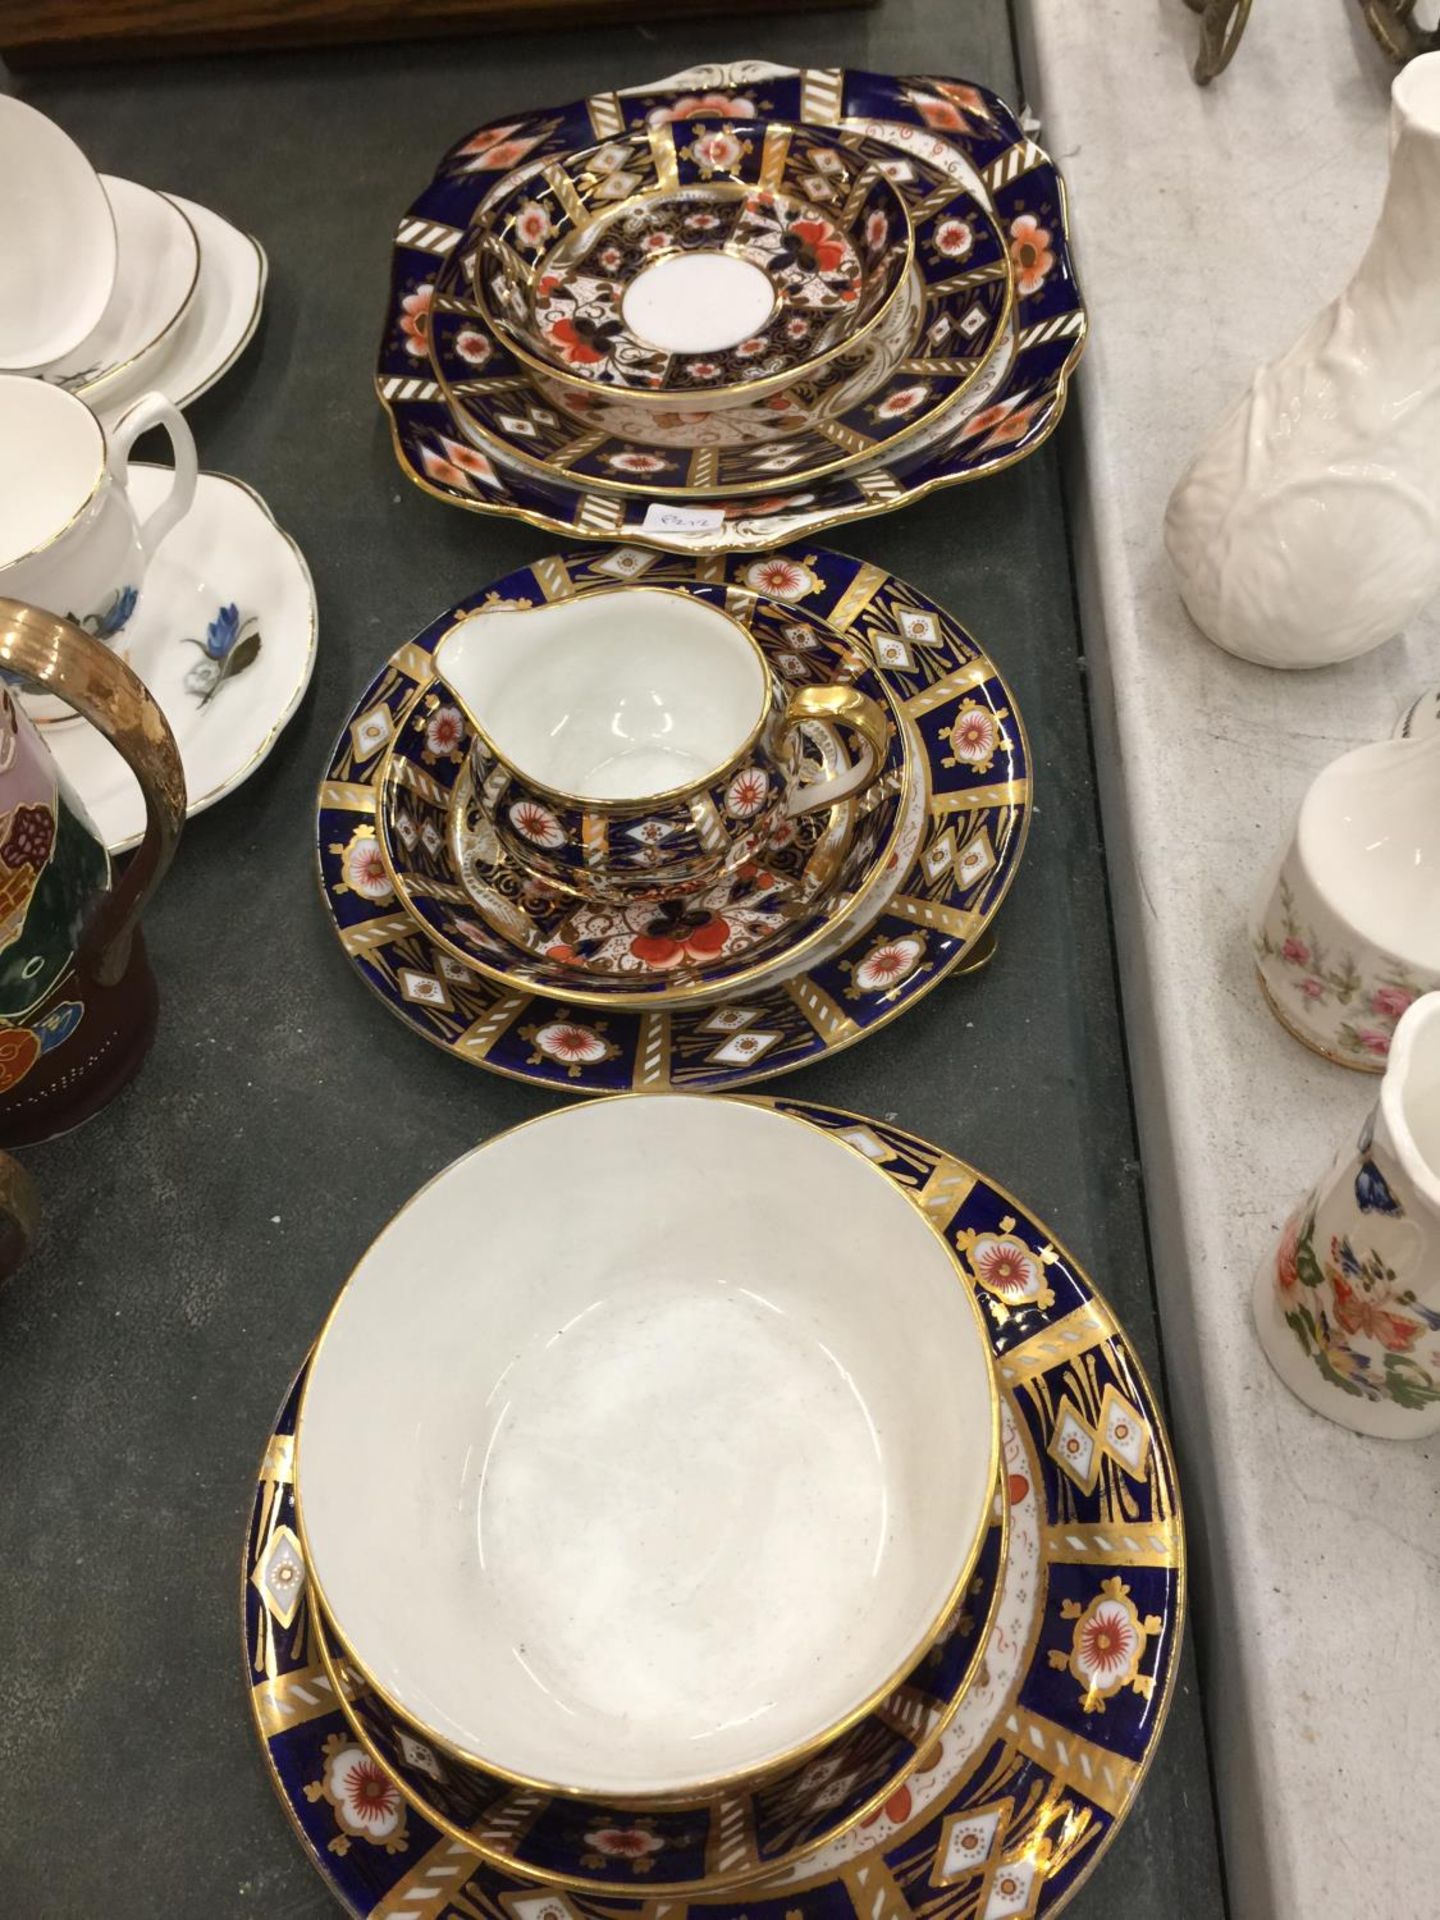 A QUANTITY OF VINTAGE POINTONS CHINA TO INCLUDE A CAKE PLATE, PLATES, SAUCERS, A CREAM JUG AND SUGAR - Image 5 of 8